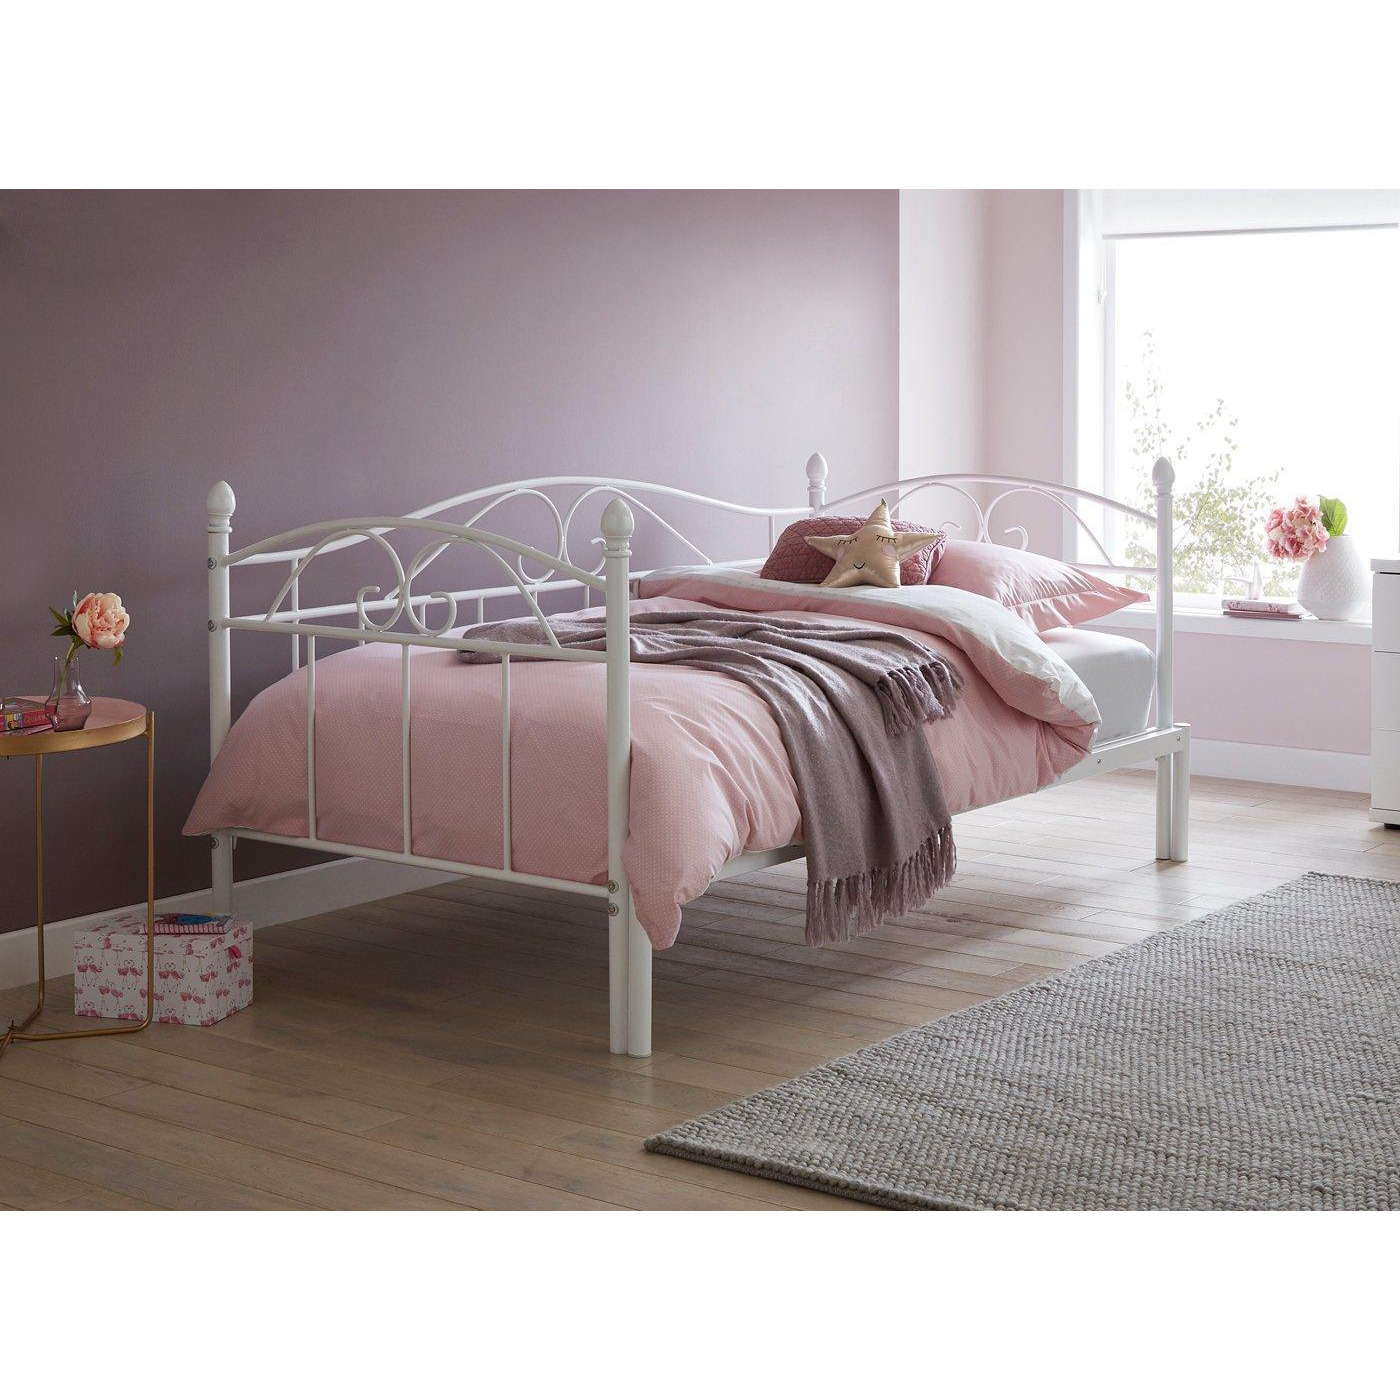 Kylie Metal Bed Frame - 3'0 Single - White